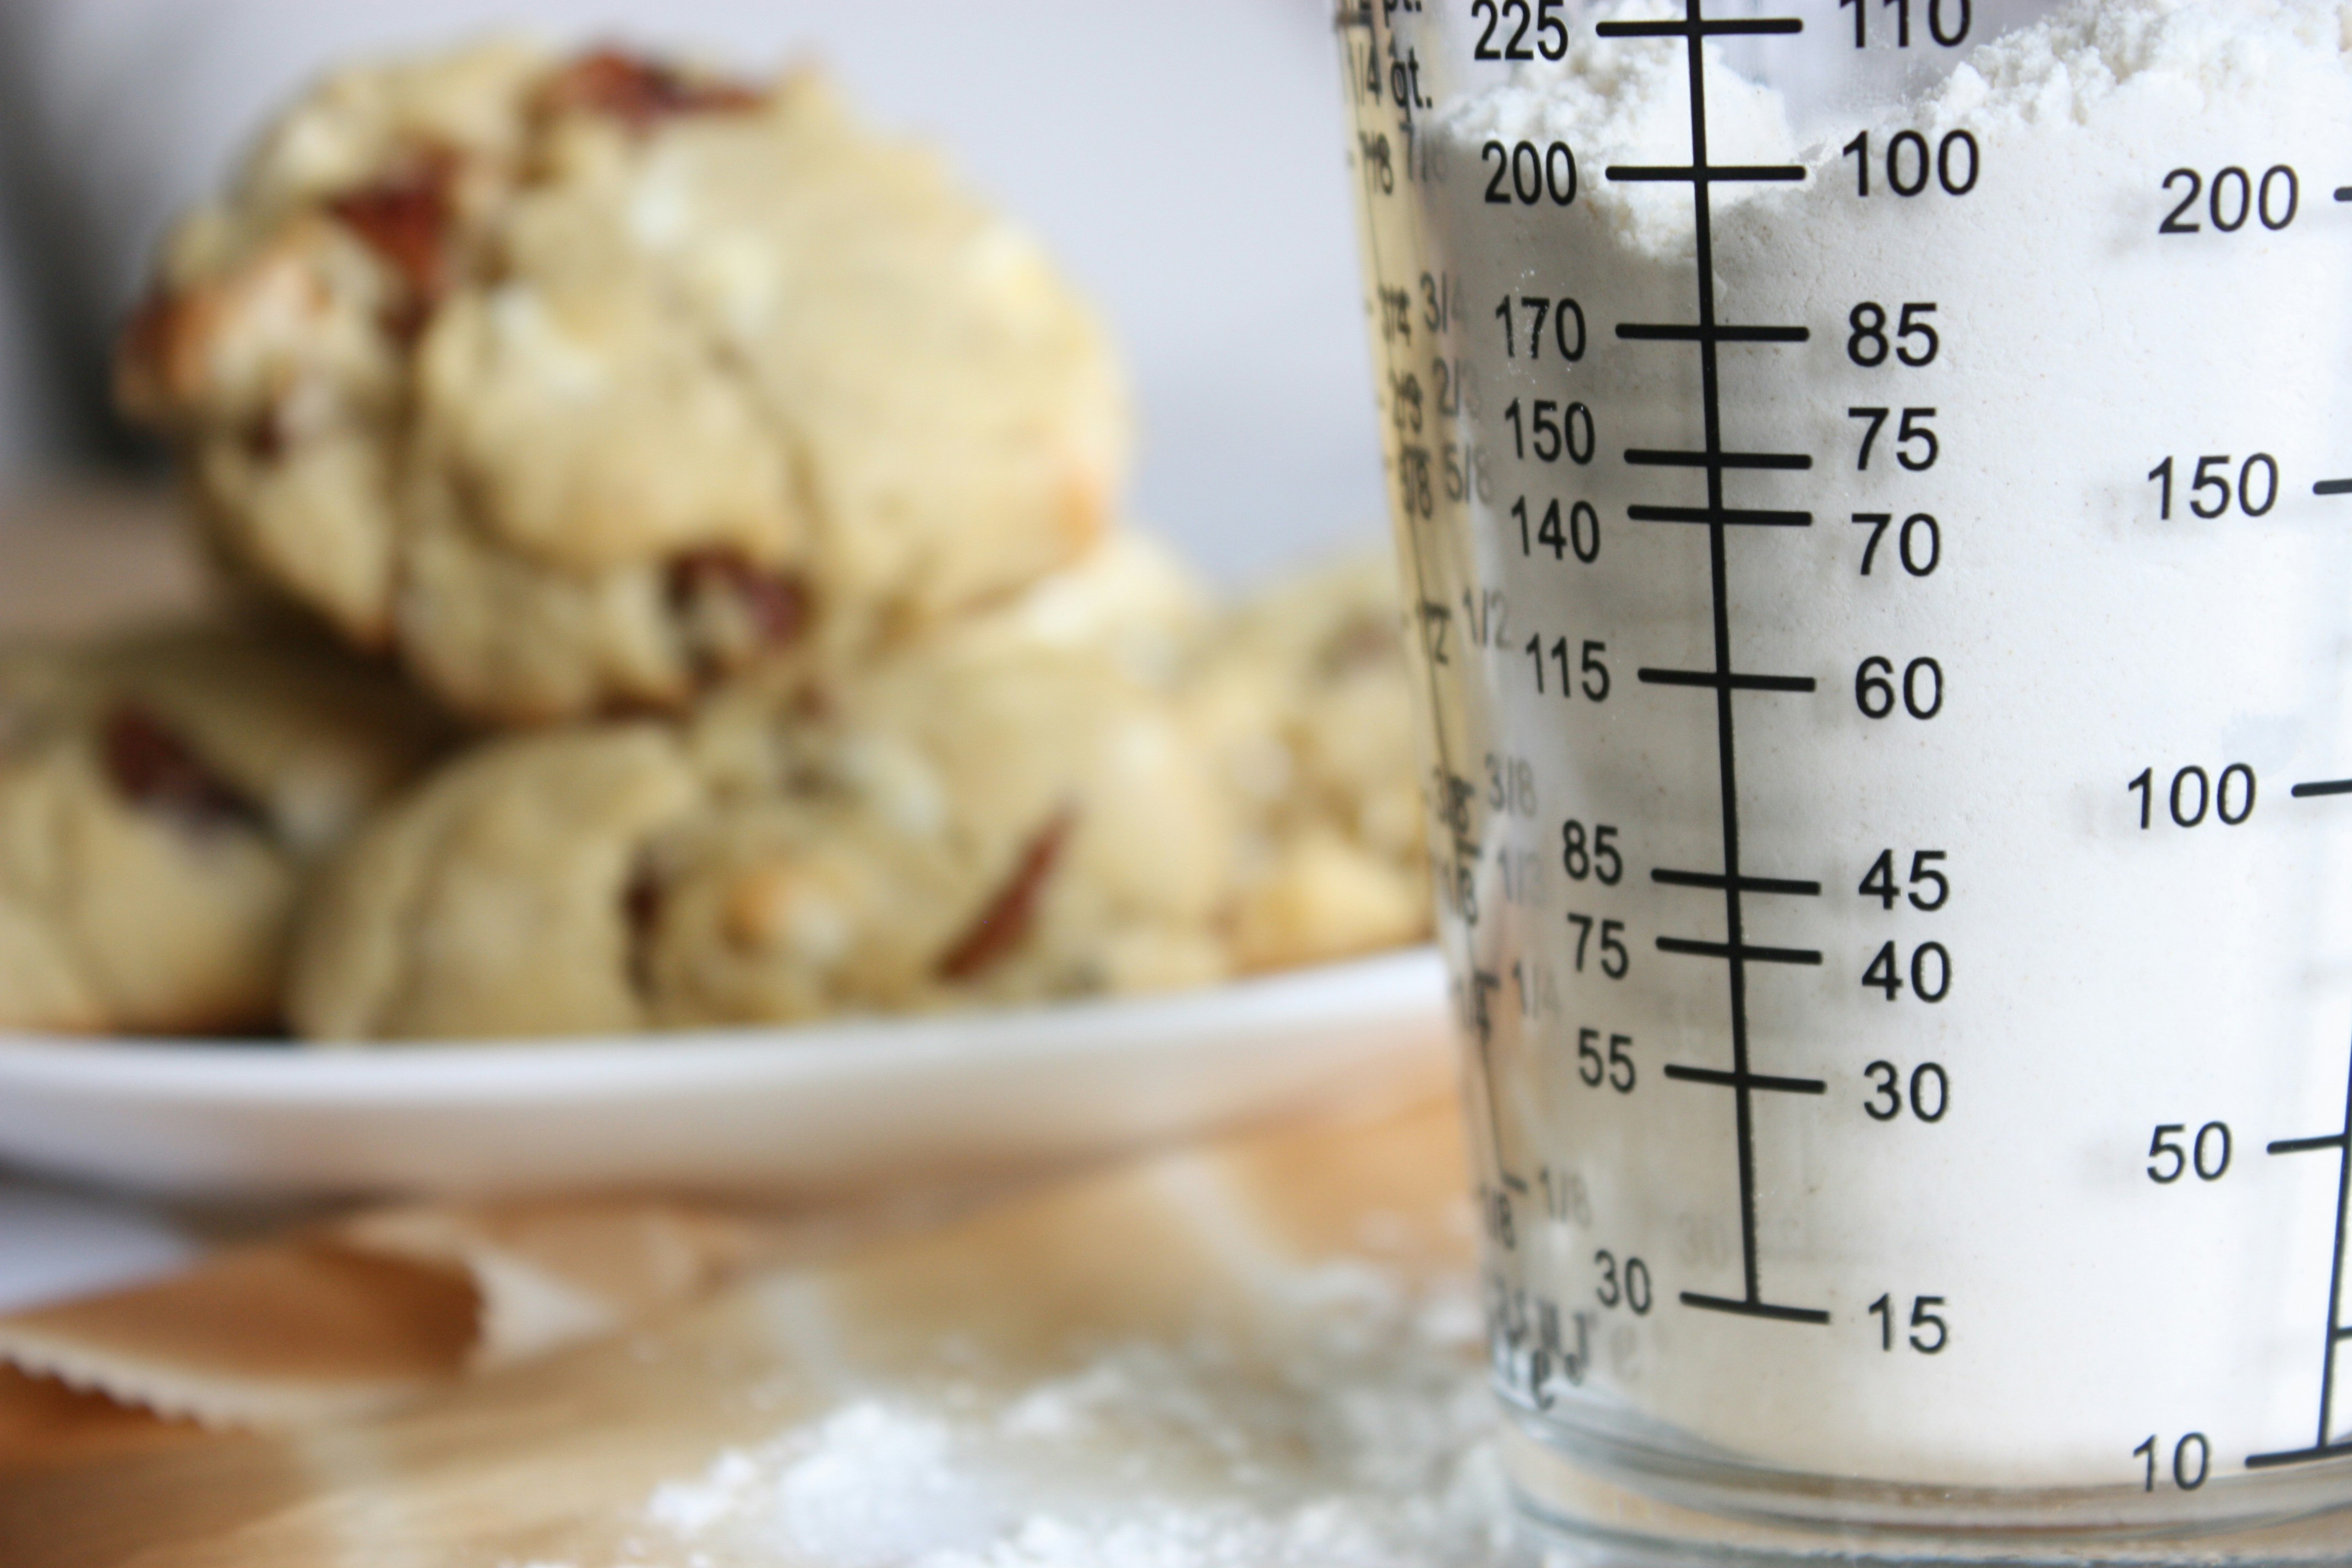 Measuring glass with flour in a kitchen